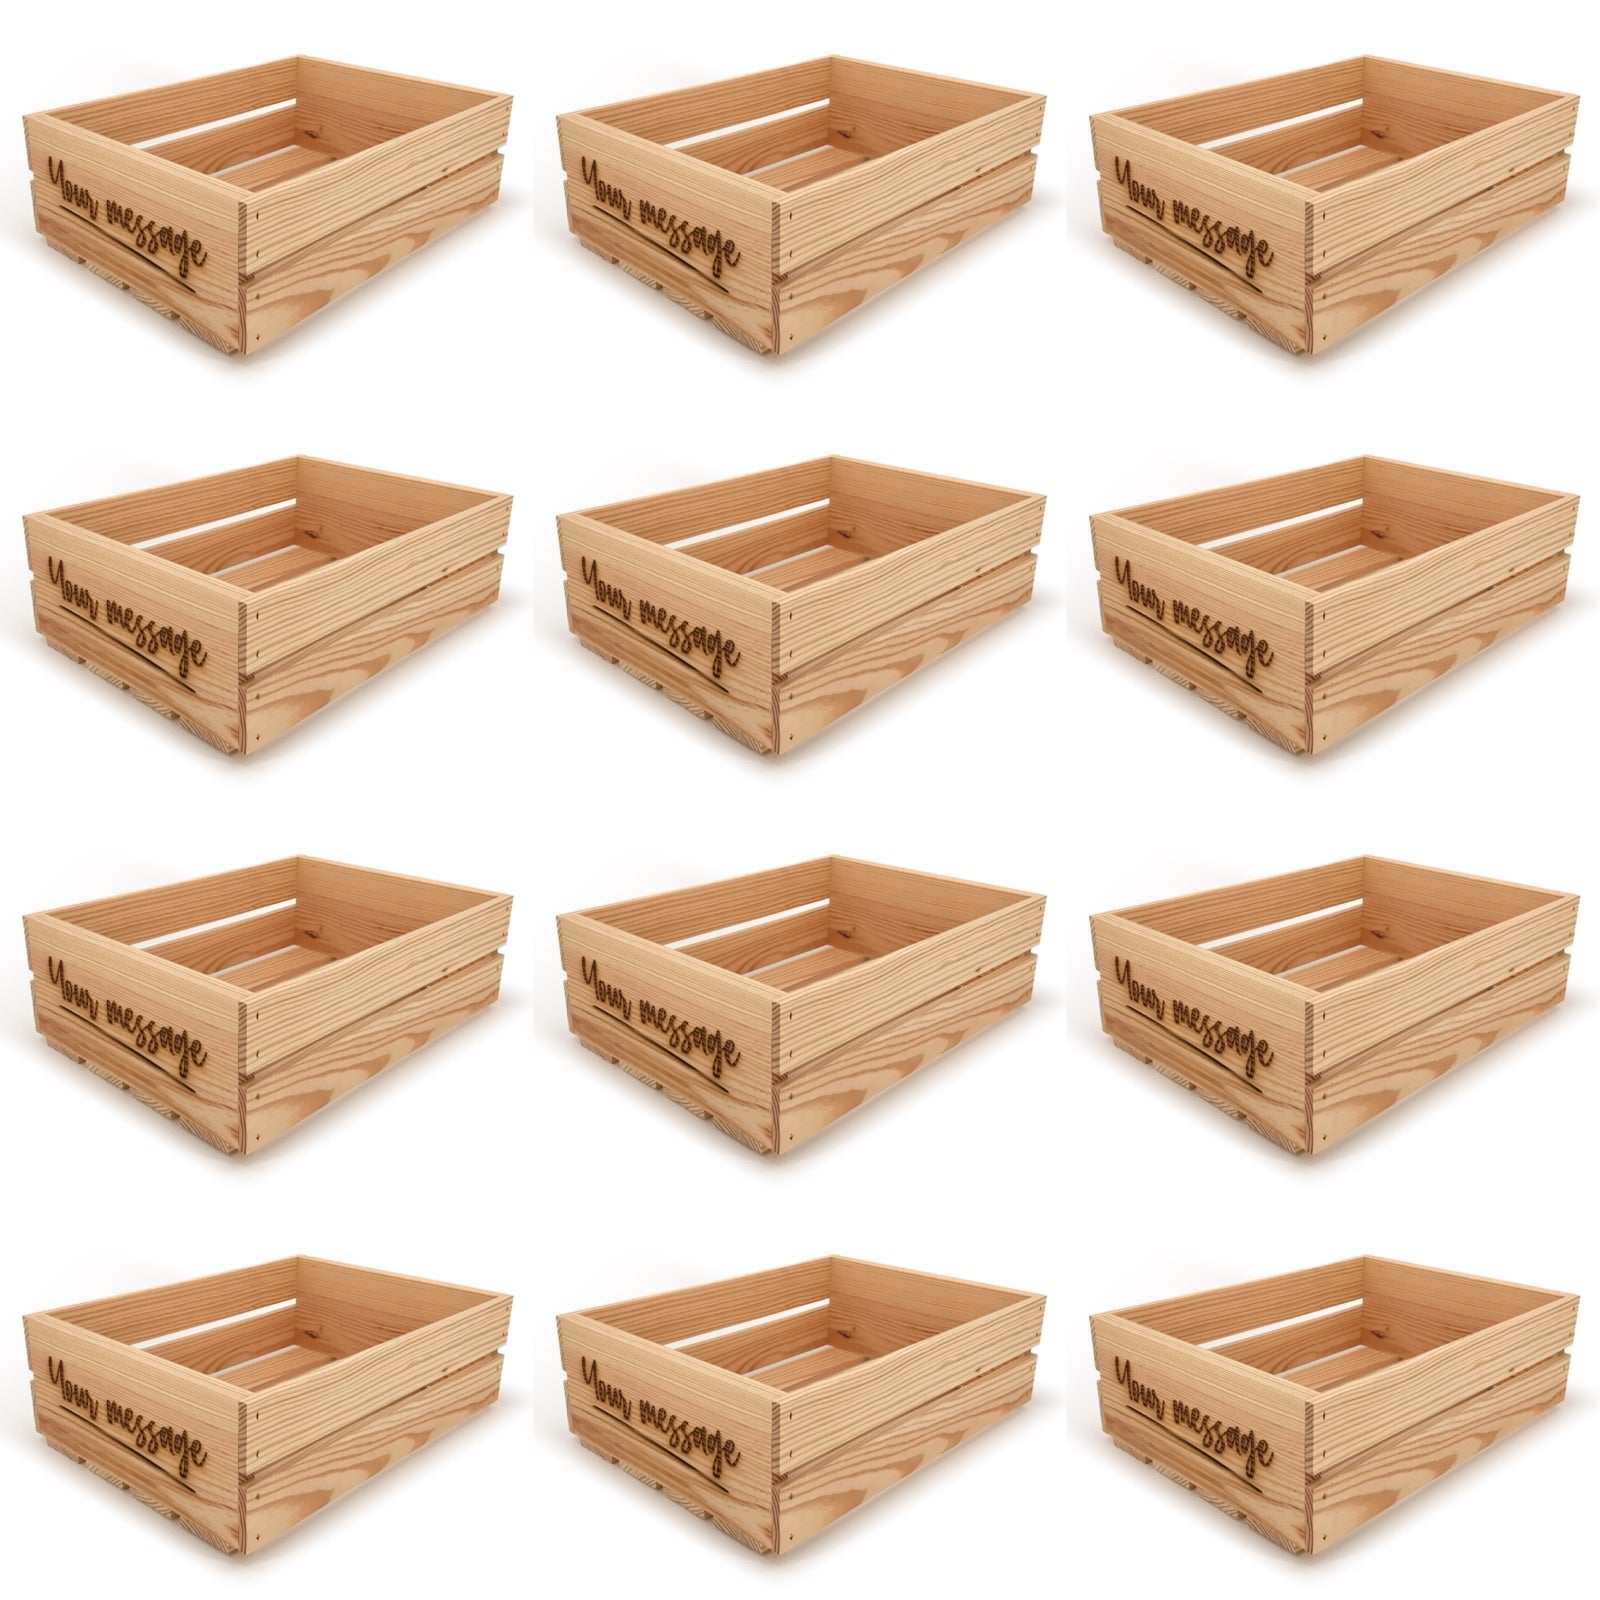 12 Small wooden crates with custom message 16x12x5.25, 6-WS-16-12-5.25-ST-NW-NL, 12-WS-16-12-5.25-ST-NW-NL, 24-WS-16-12-5.25-ST-NW-NL, 48-WS-16-12-5.25-ST-NW-NL, 96-WS-16-12-5.25-ST-NW-NL